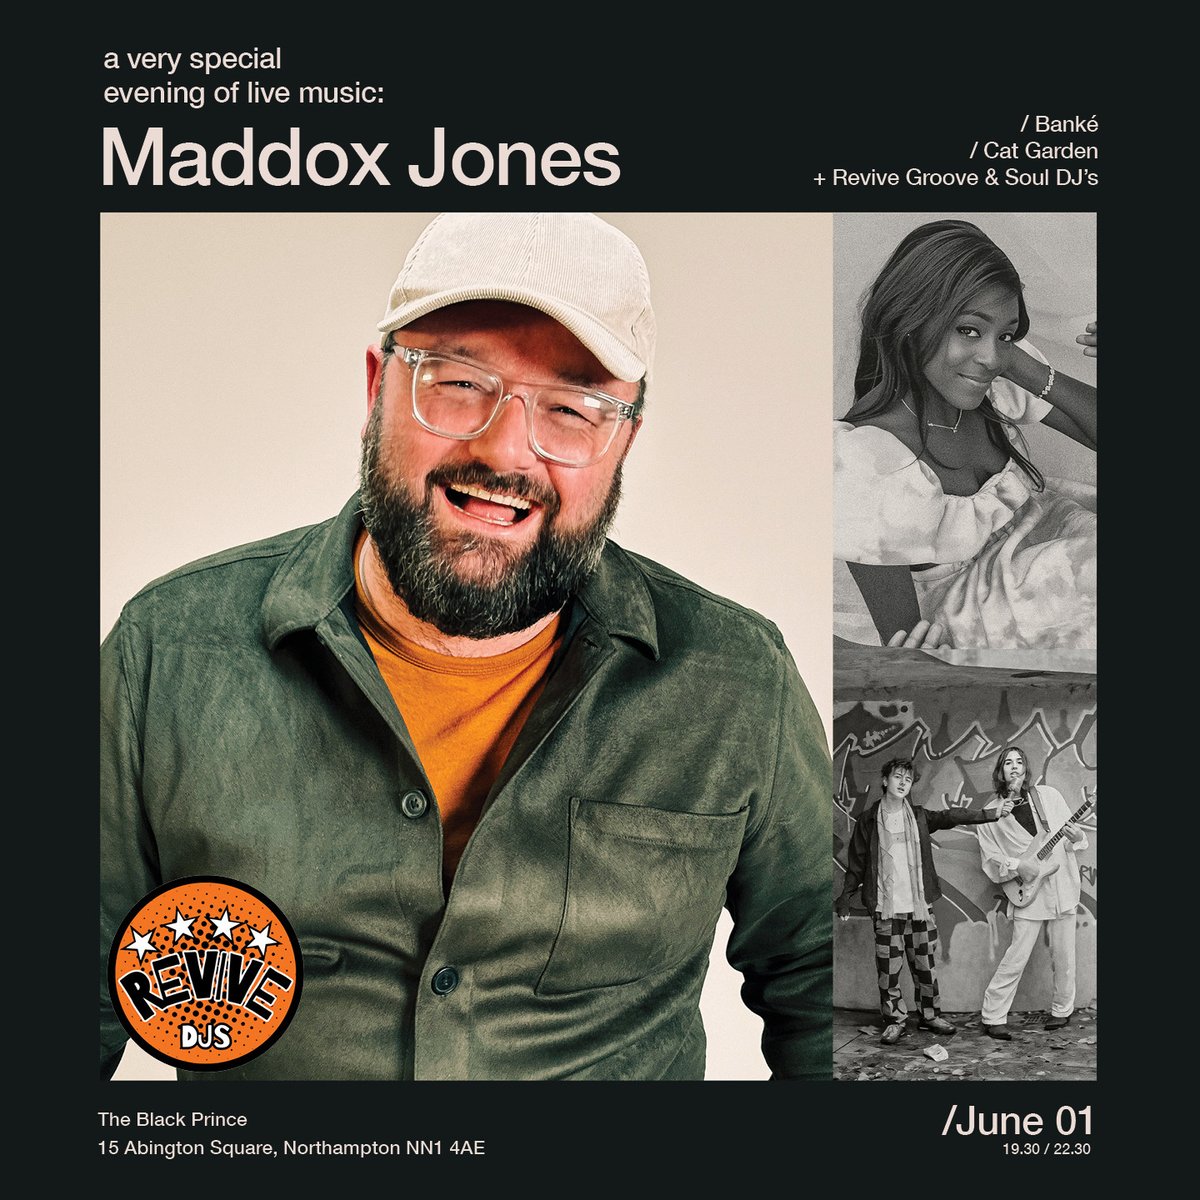 Our Saturday night show is the one and only @itsmaddoxjones with support from Banke and Cat Garden. Remaining tix via skiddle.com/e/38079068/ or pay on the door